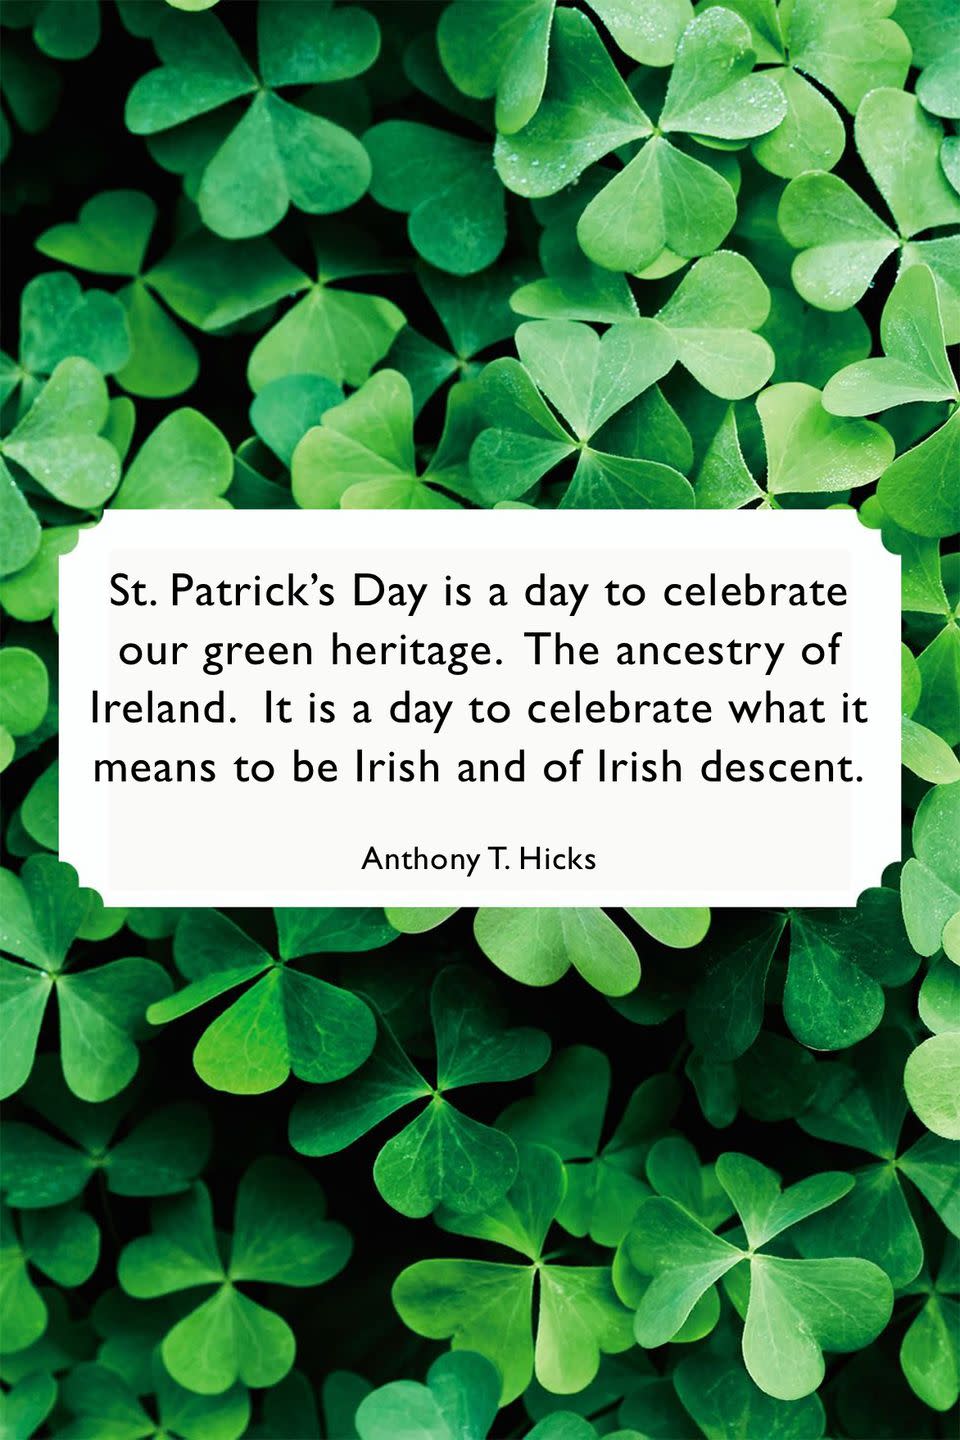 <p>"St. Patrick's Day is a day to celebrate our green heritage. The ancestry of Ireland. It is a day to celebrate what it means to be Irish and of Irish descent."</p>